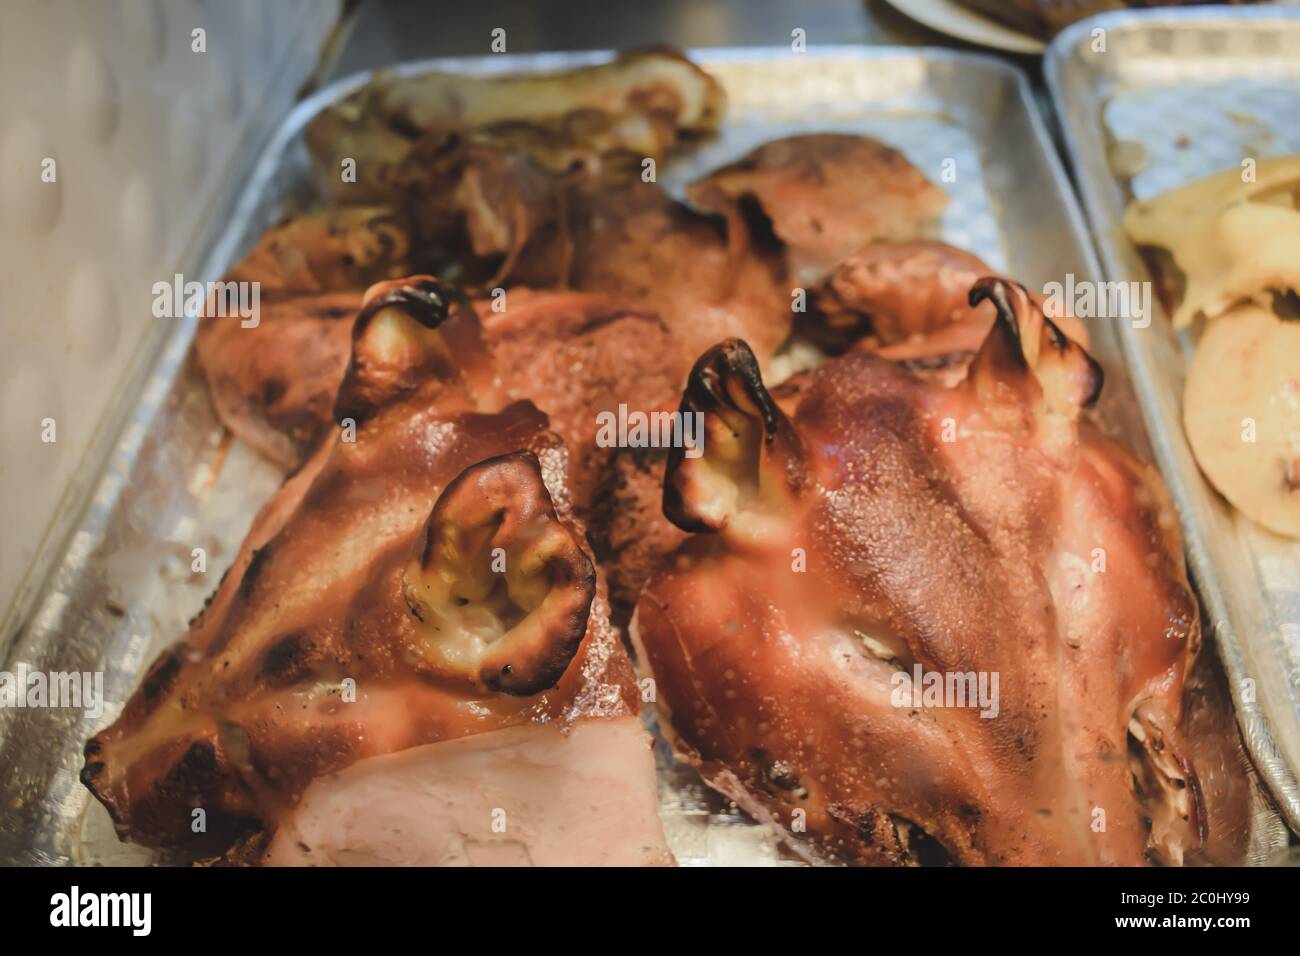 Smoked chopped pig heads sold on the streets of Hong Kong China Stock Photo